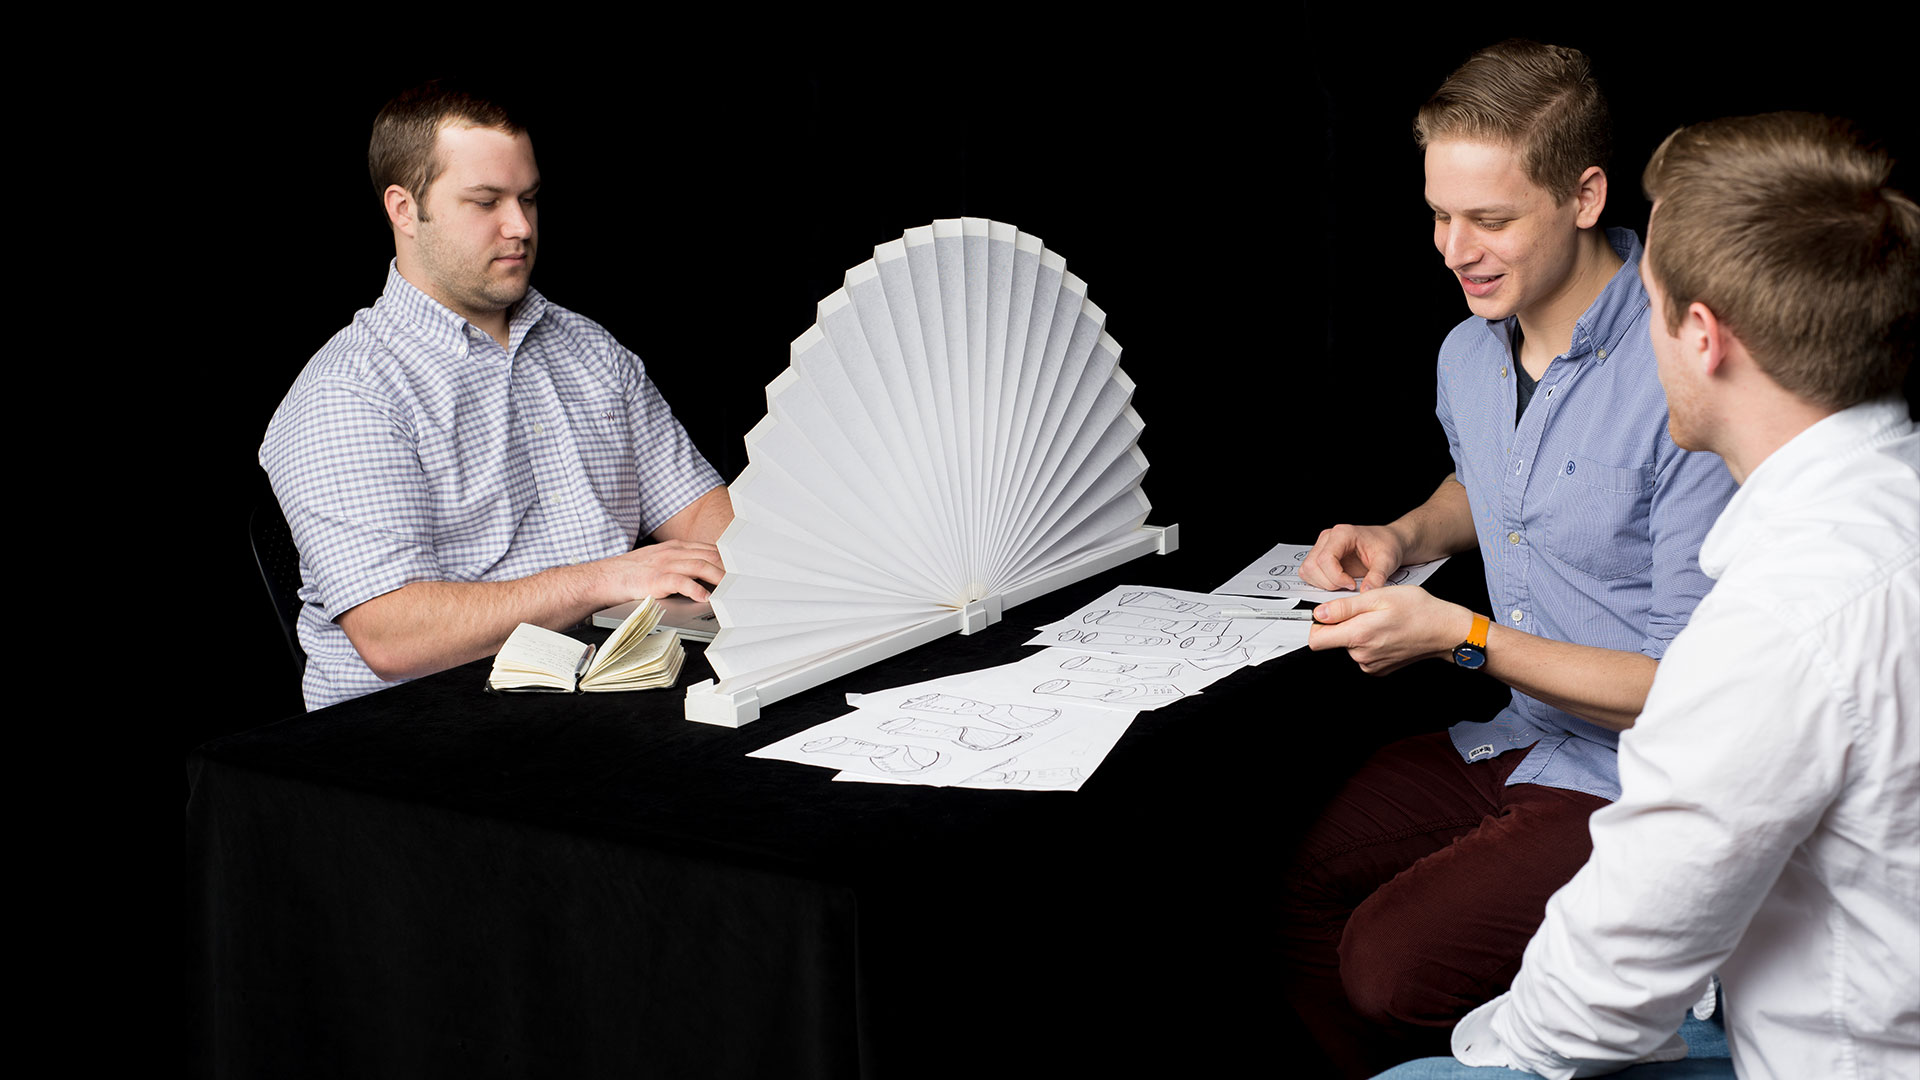 Small white table fanned open with accordion pleating connected to white plastic base, students on either side of divider doing separate tasks